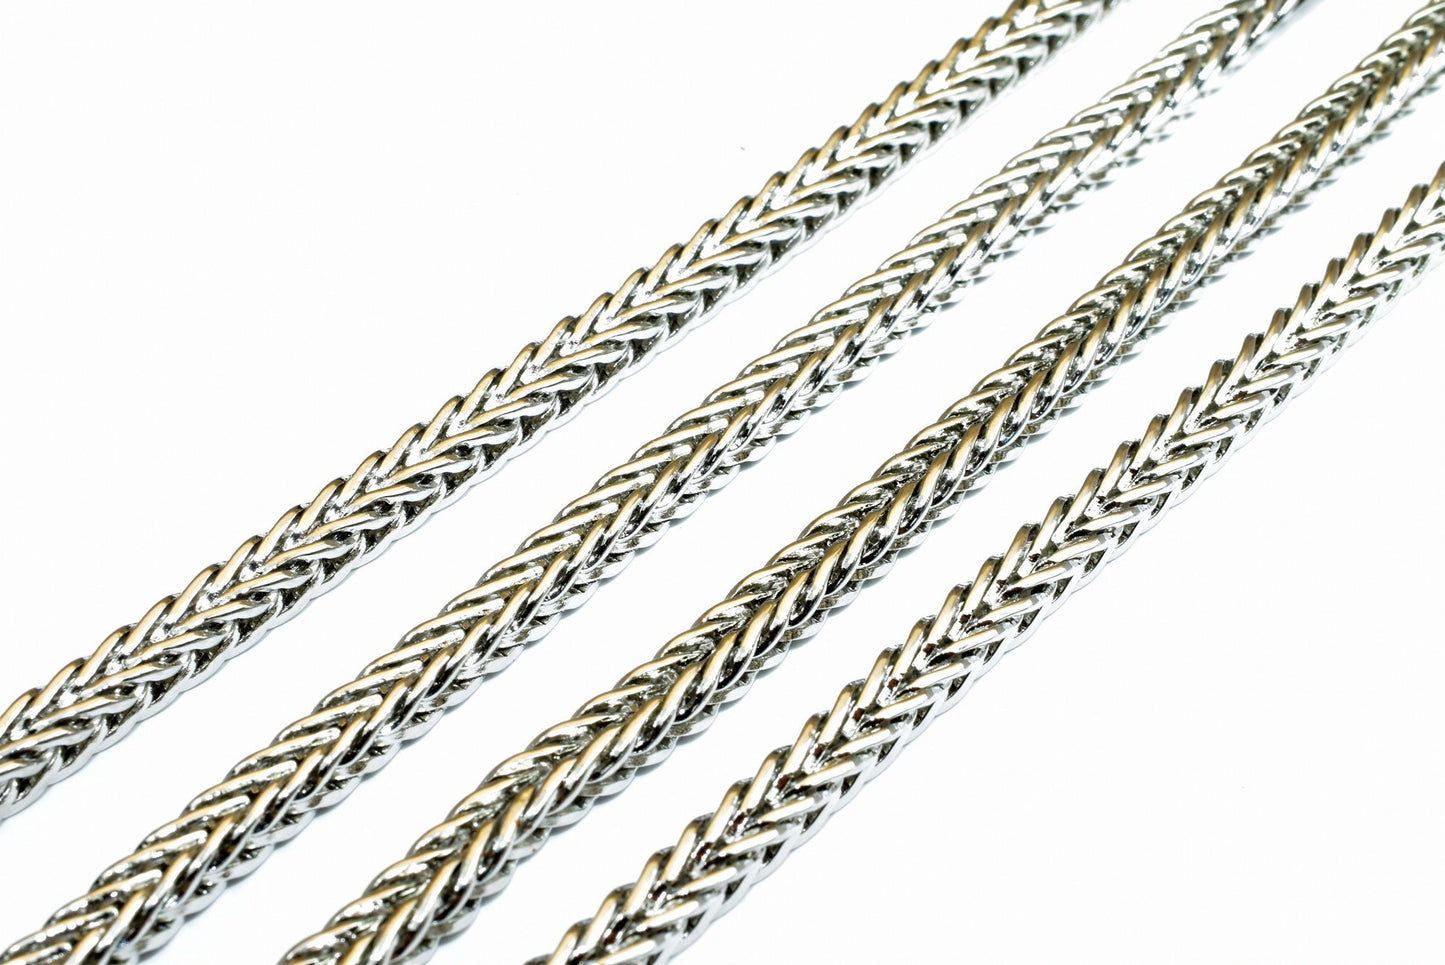 Spiga or Wheat Rhodium Filled White Gold Filled Chain 22" Inch, Size 4x4.5mm CS8 For Jewelry Making